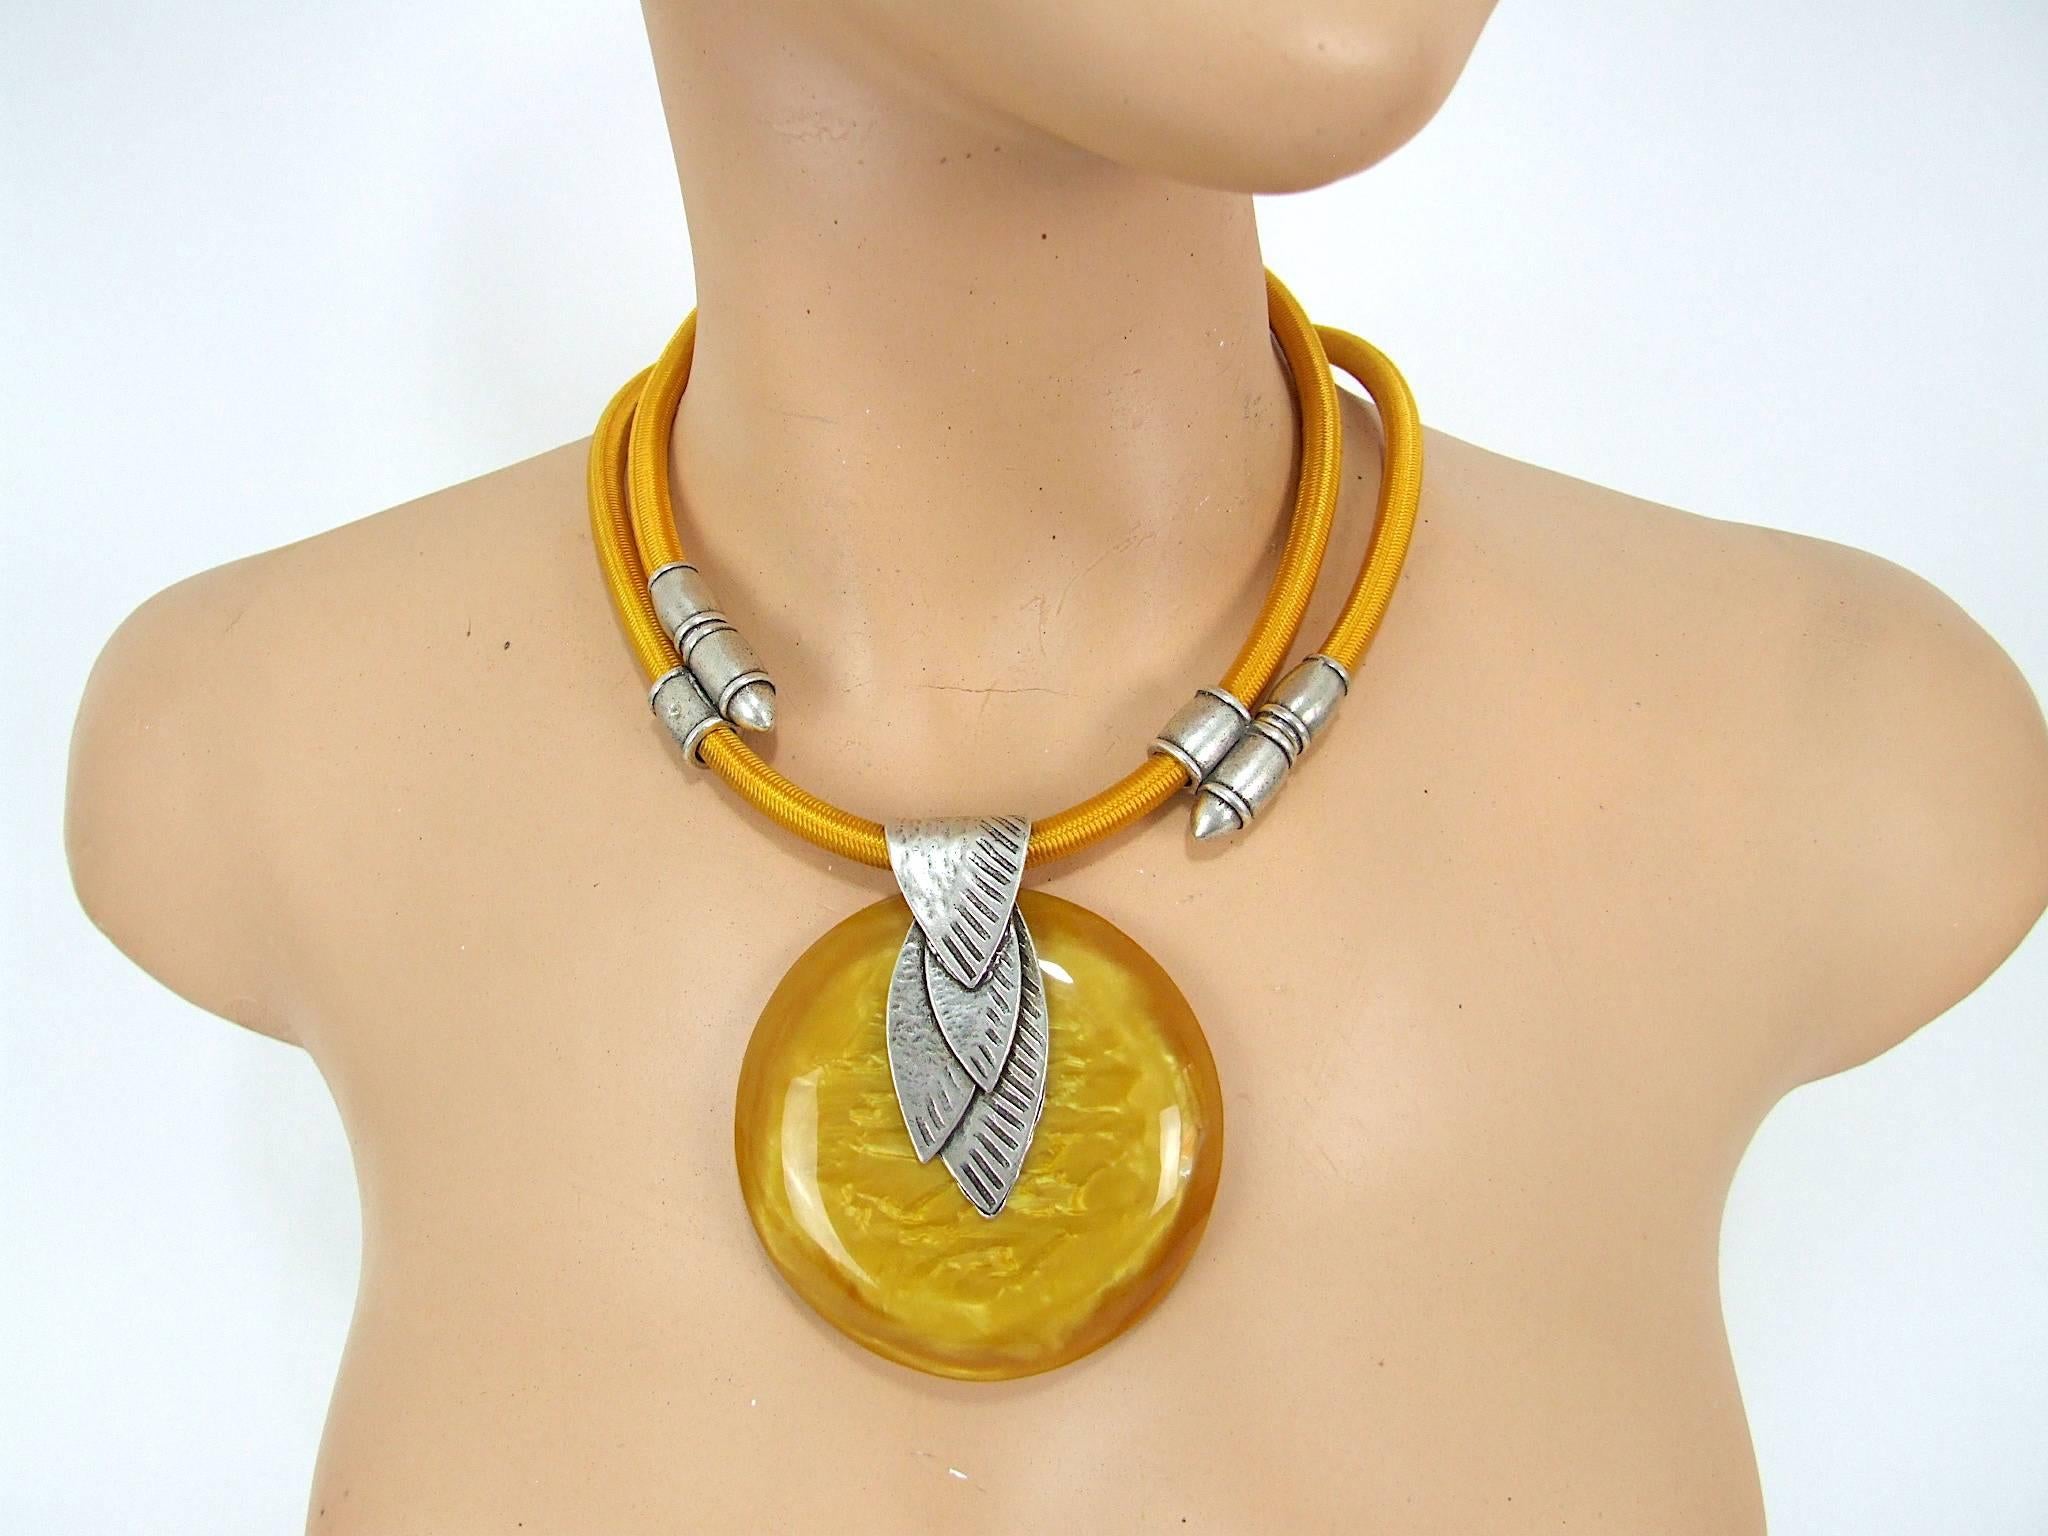 French Art Deco style designer modernist galalith necklace by Max Debraine. Pearlised yellow galalith with yellow silk cord hanger. Signed to the reverse. It hangs as short as 15 inches (38cm) around the neck to the cord and central panel. It is